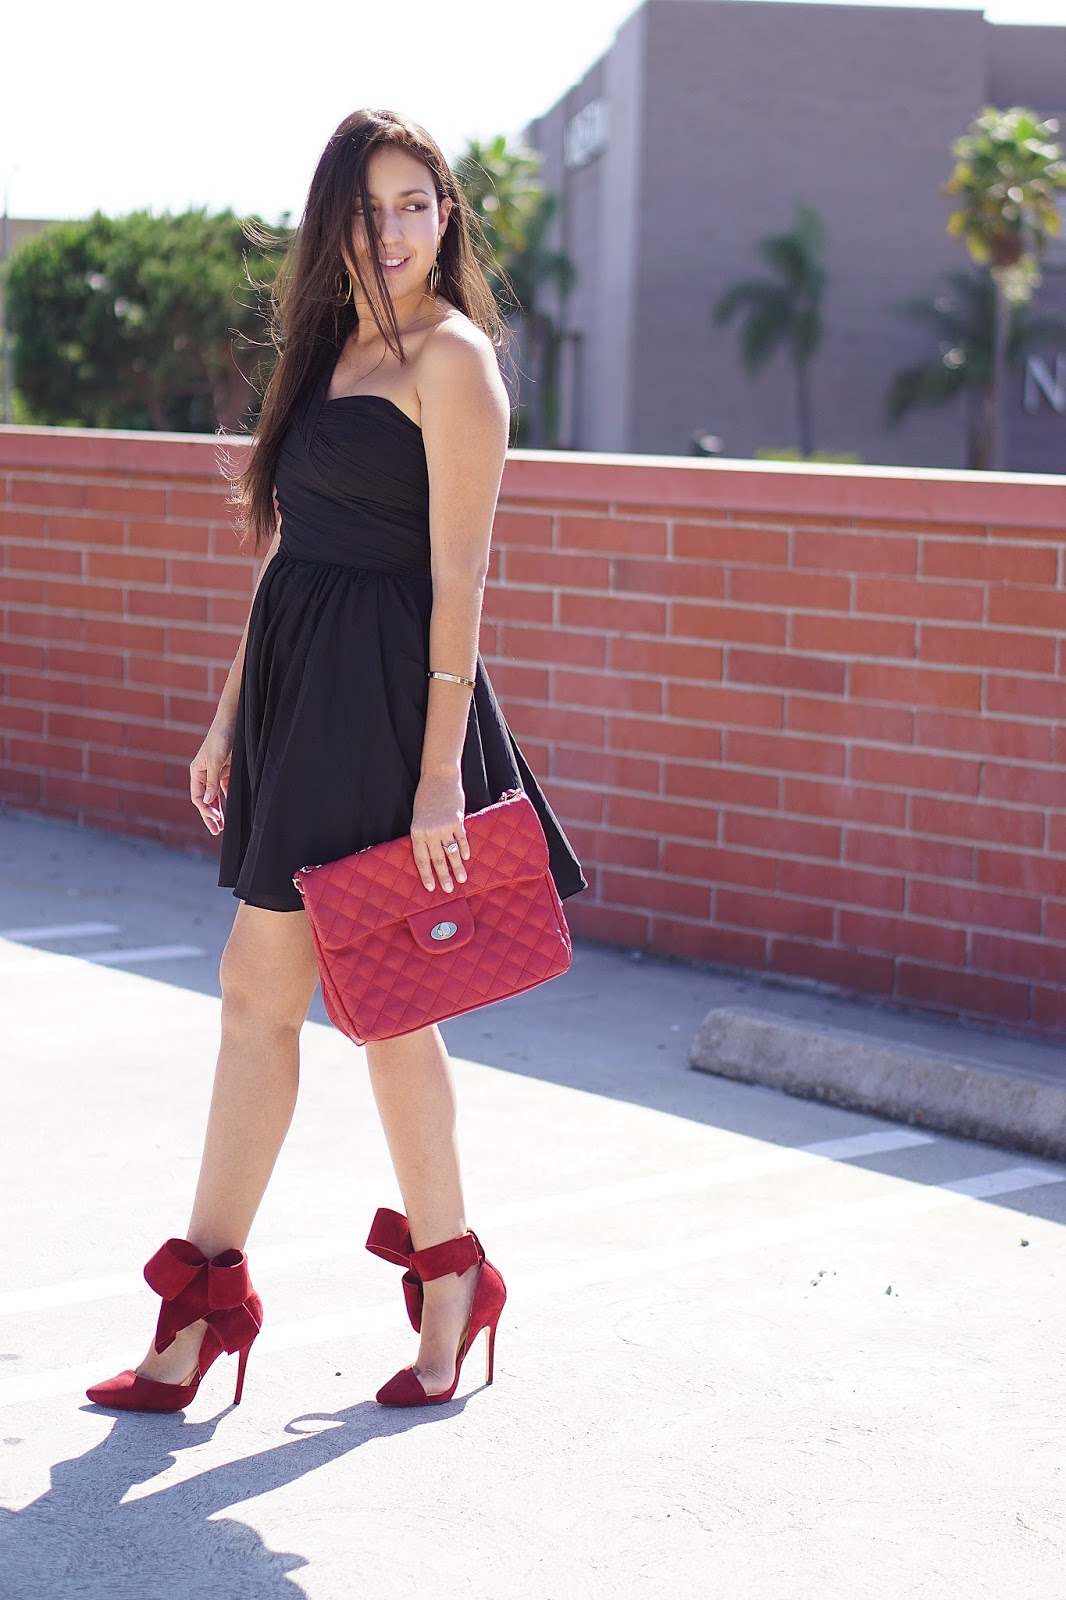 Aminah Abdul Jillil, Aminah Abdul Jillil Red Bow Pumps, Express, Little Black Dress, One Shoulder Black Dress, One shoulder Express Dress, Prima Donna Red Quilted Purse, Red Bow Heels, 